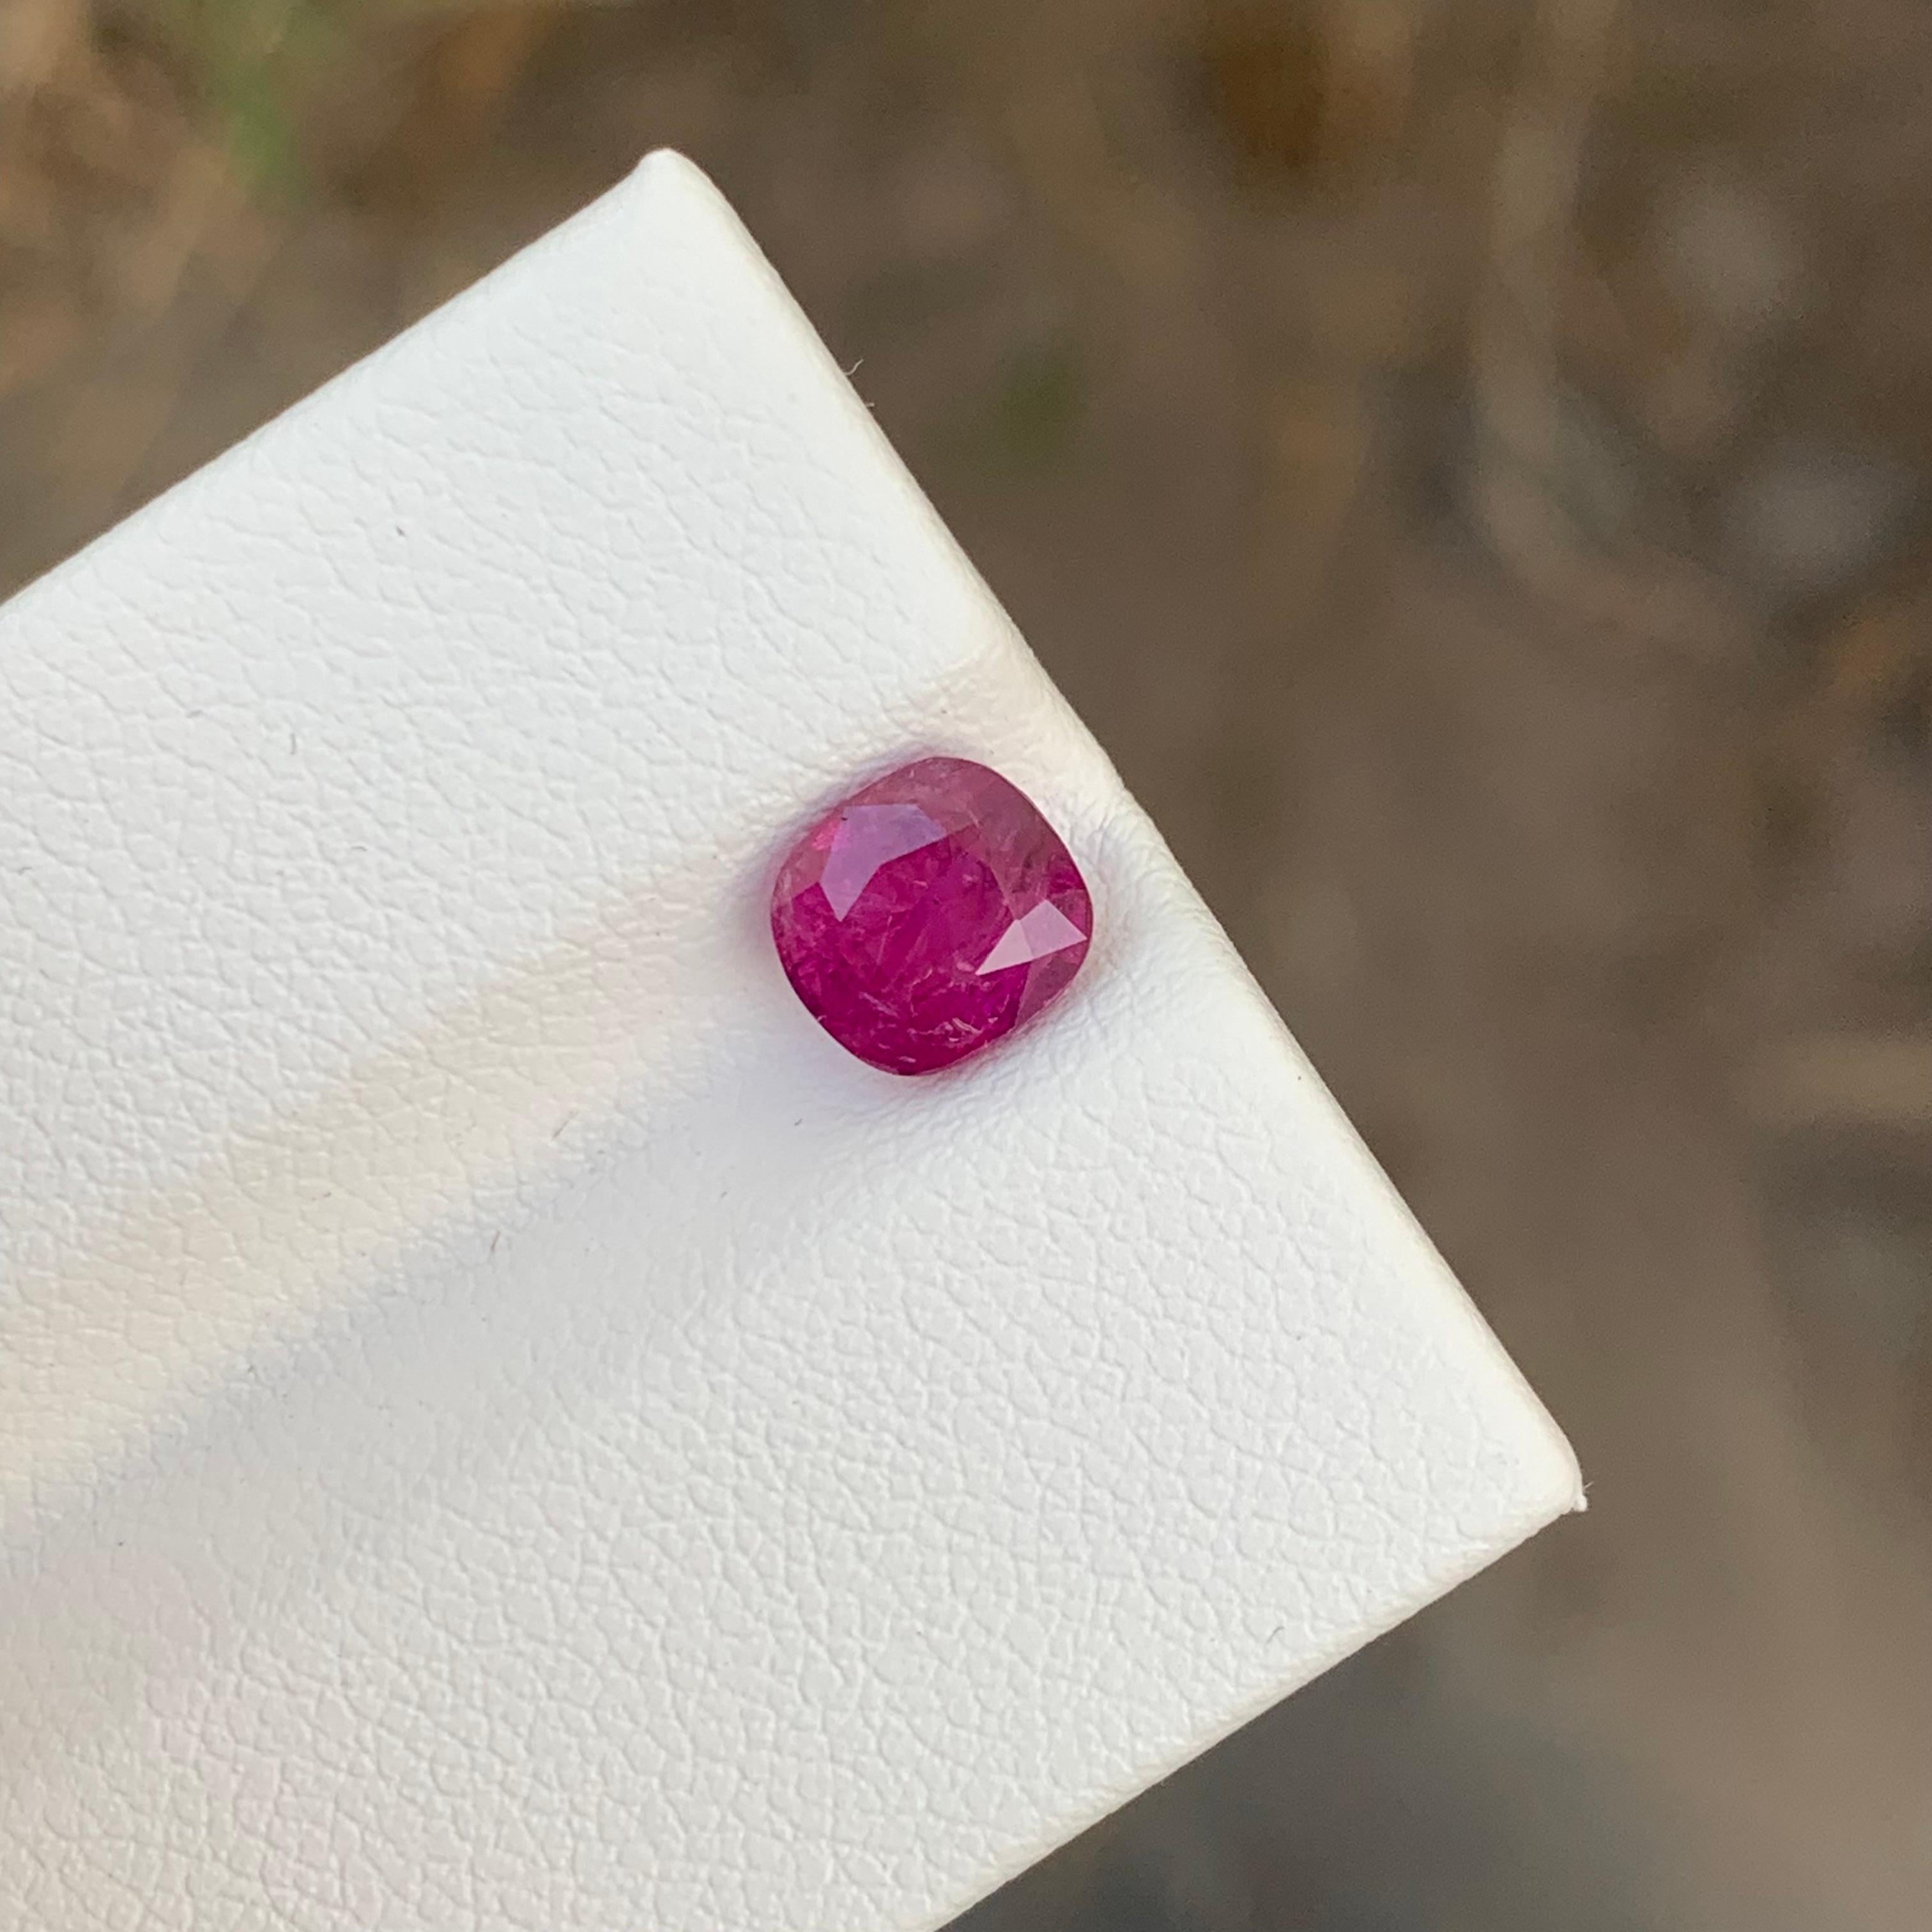 Loose Ruby
Weight: 1.46 Carats 
Dimension: 6.38x6.05x3.92 Mm
Origin: Jagdalek Afghanistan 
Shape: Cushion
Color: Pink
Treatment: Non / Natural
Certificate: Available 
Jagdalek, located in eastern Afghanistan, is renowned for its exceptional rubies.